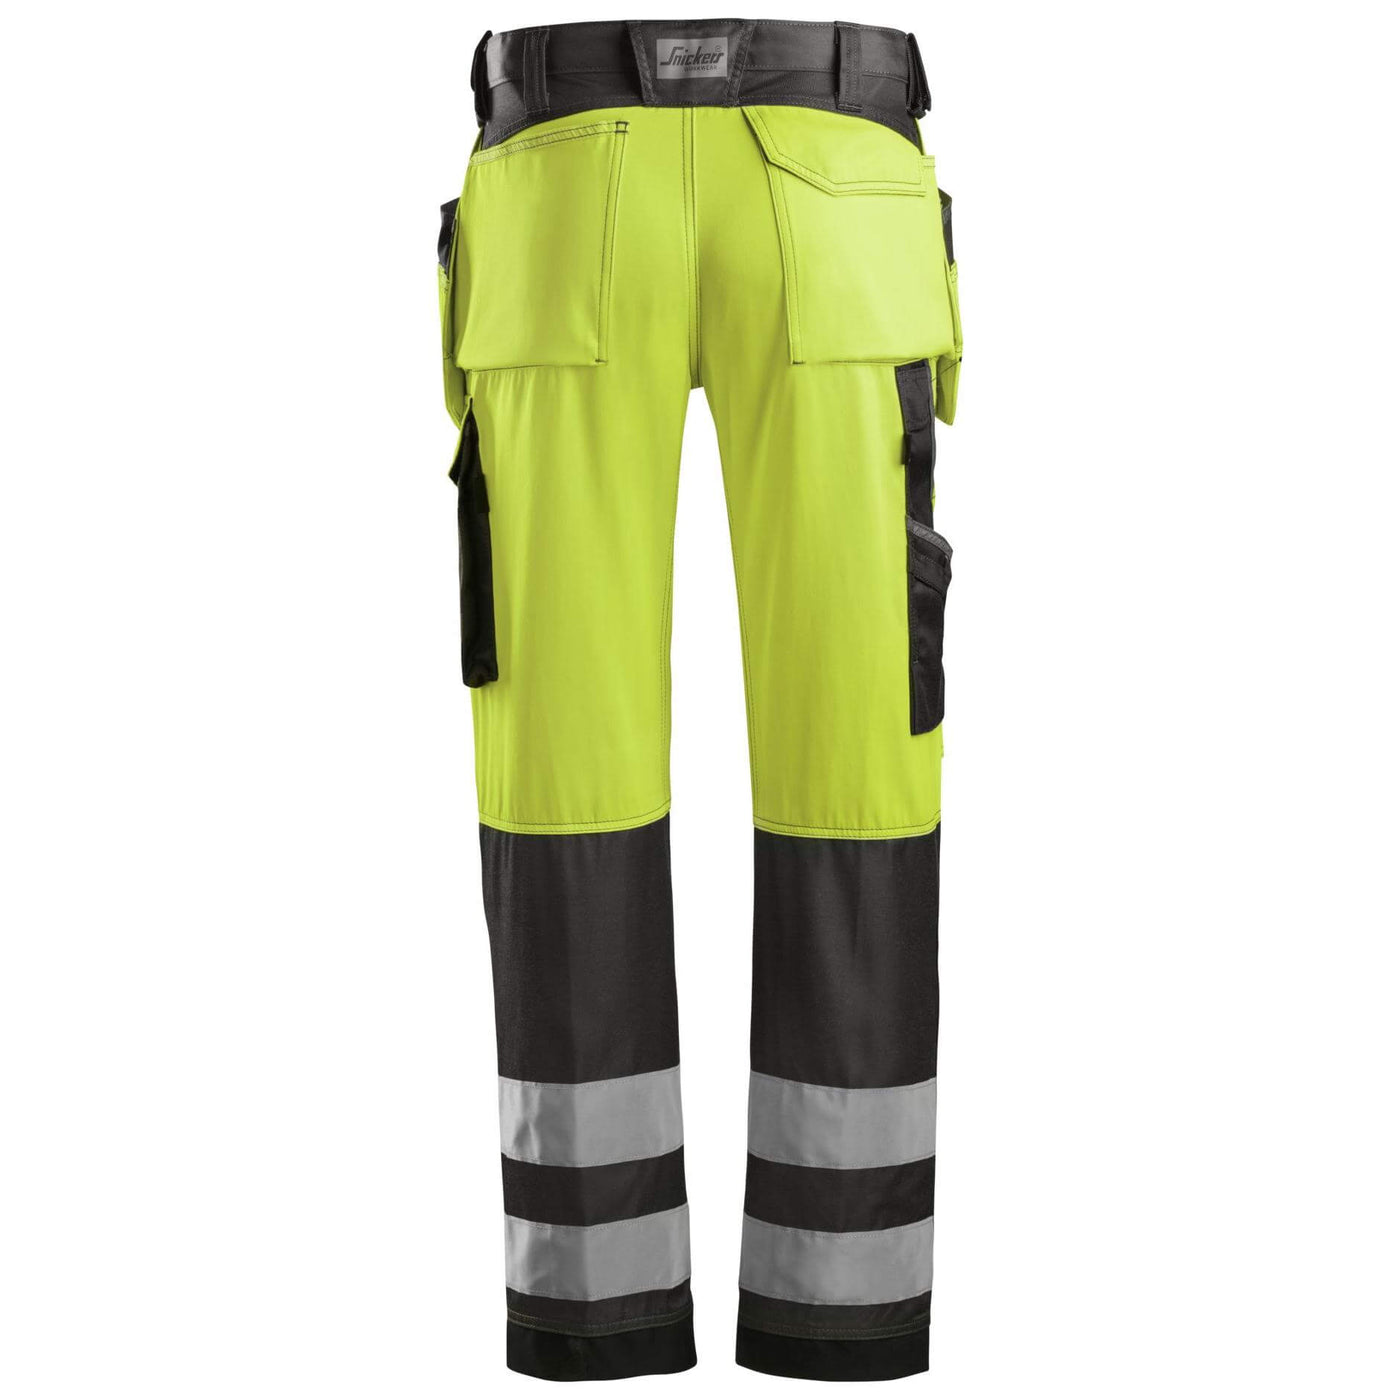 Snickers 3233 Hi Vis Loose Fit Holster Pocket Trousers Class 2 Hi Vis Yellow Muted Black back #colour_hi-vis-yellow-muted-black